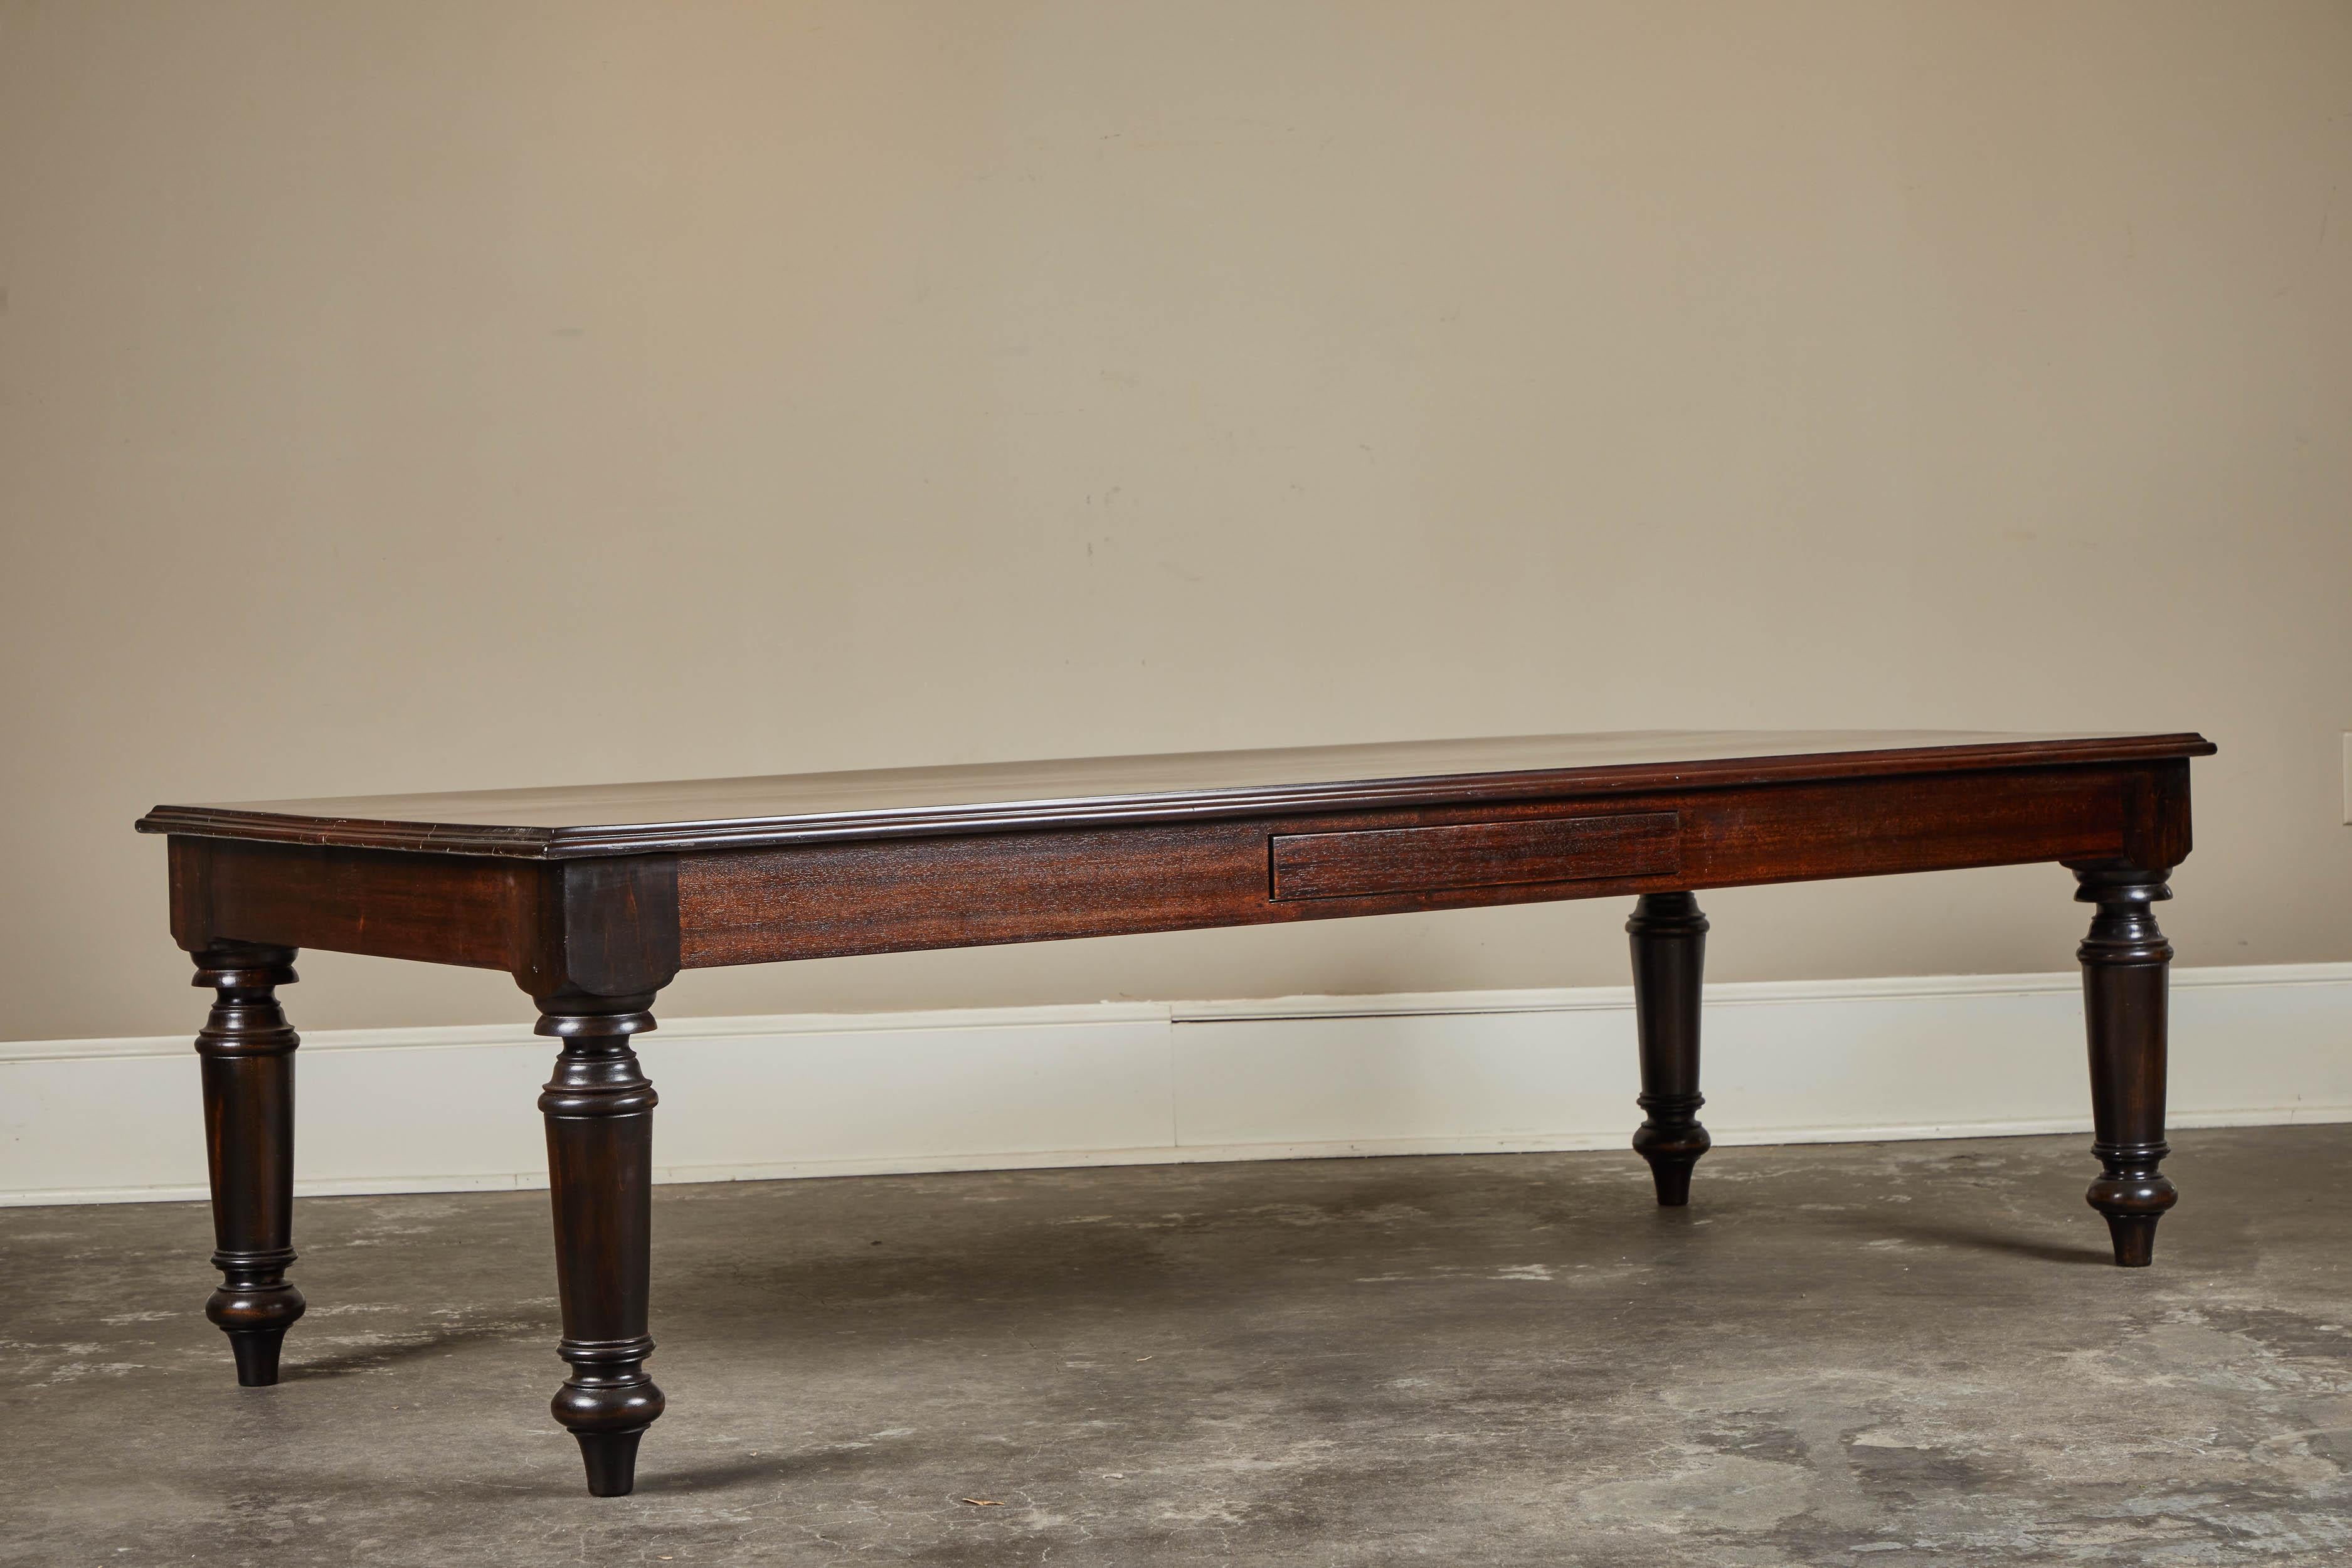 Vietnamese 19th Century British Colonial Rosewood Coffee Table with Newer Legs